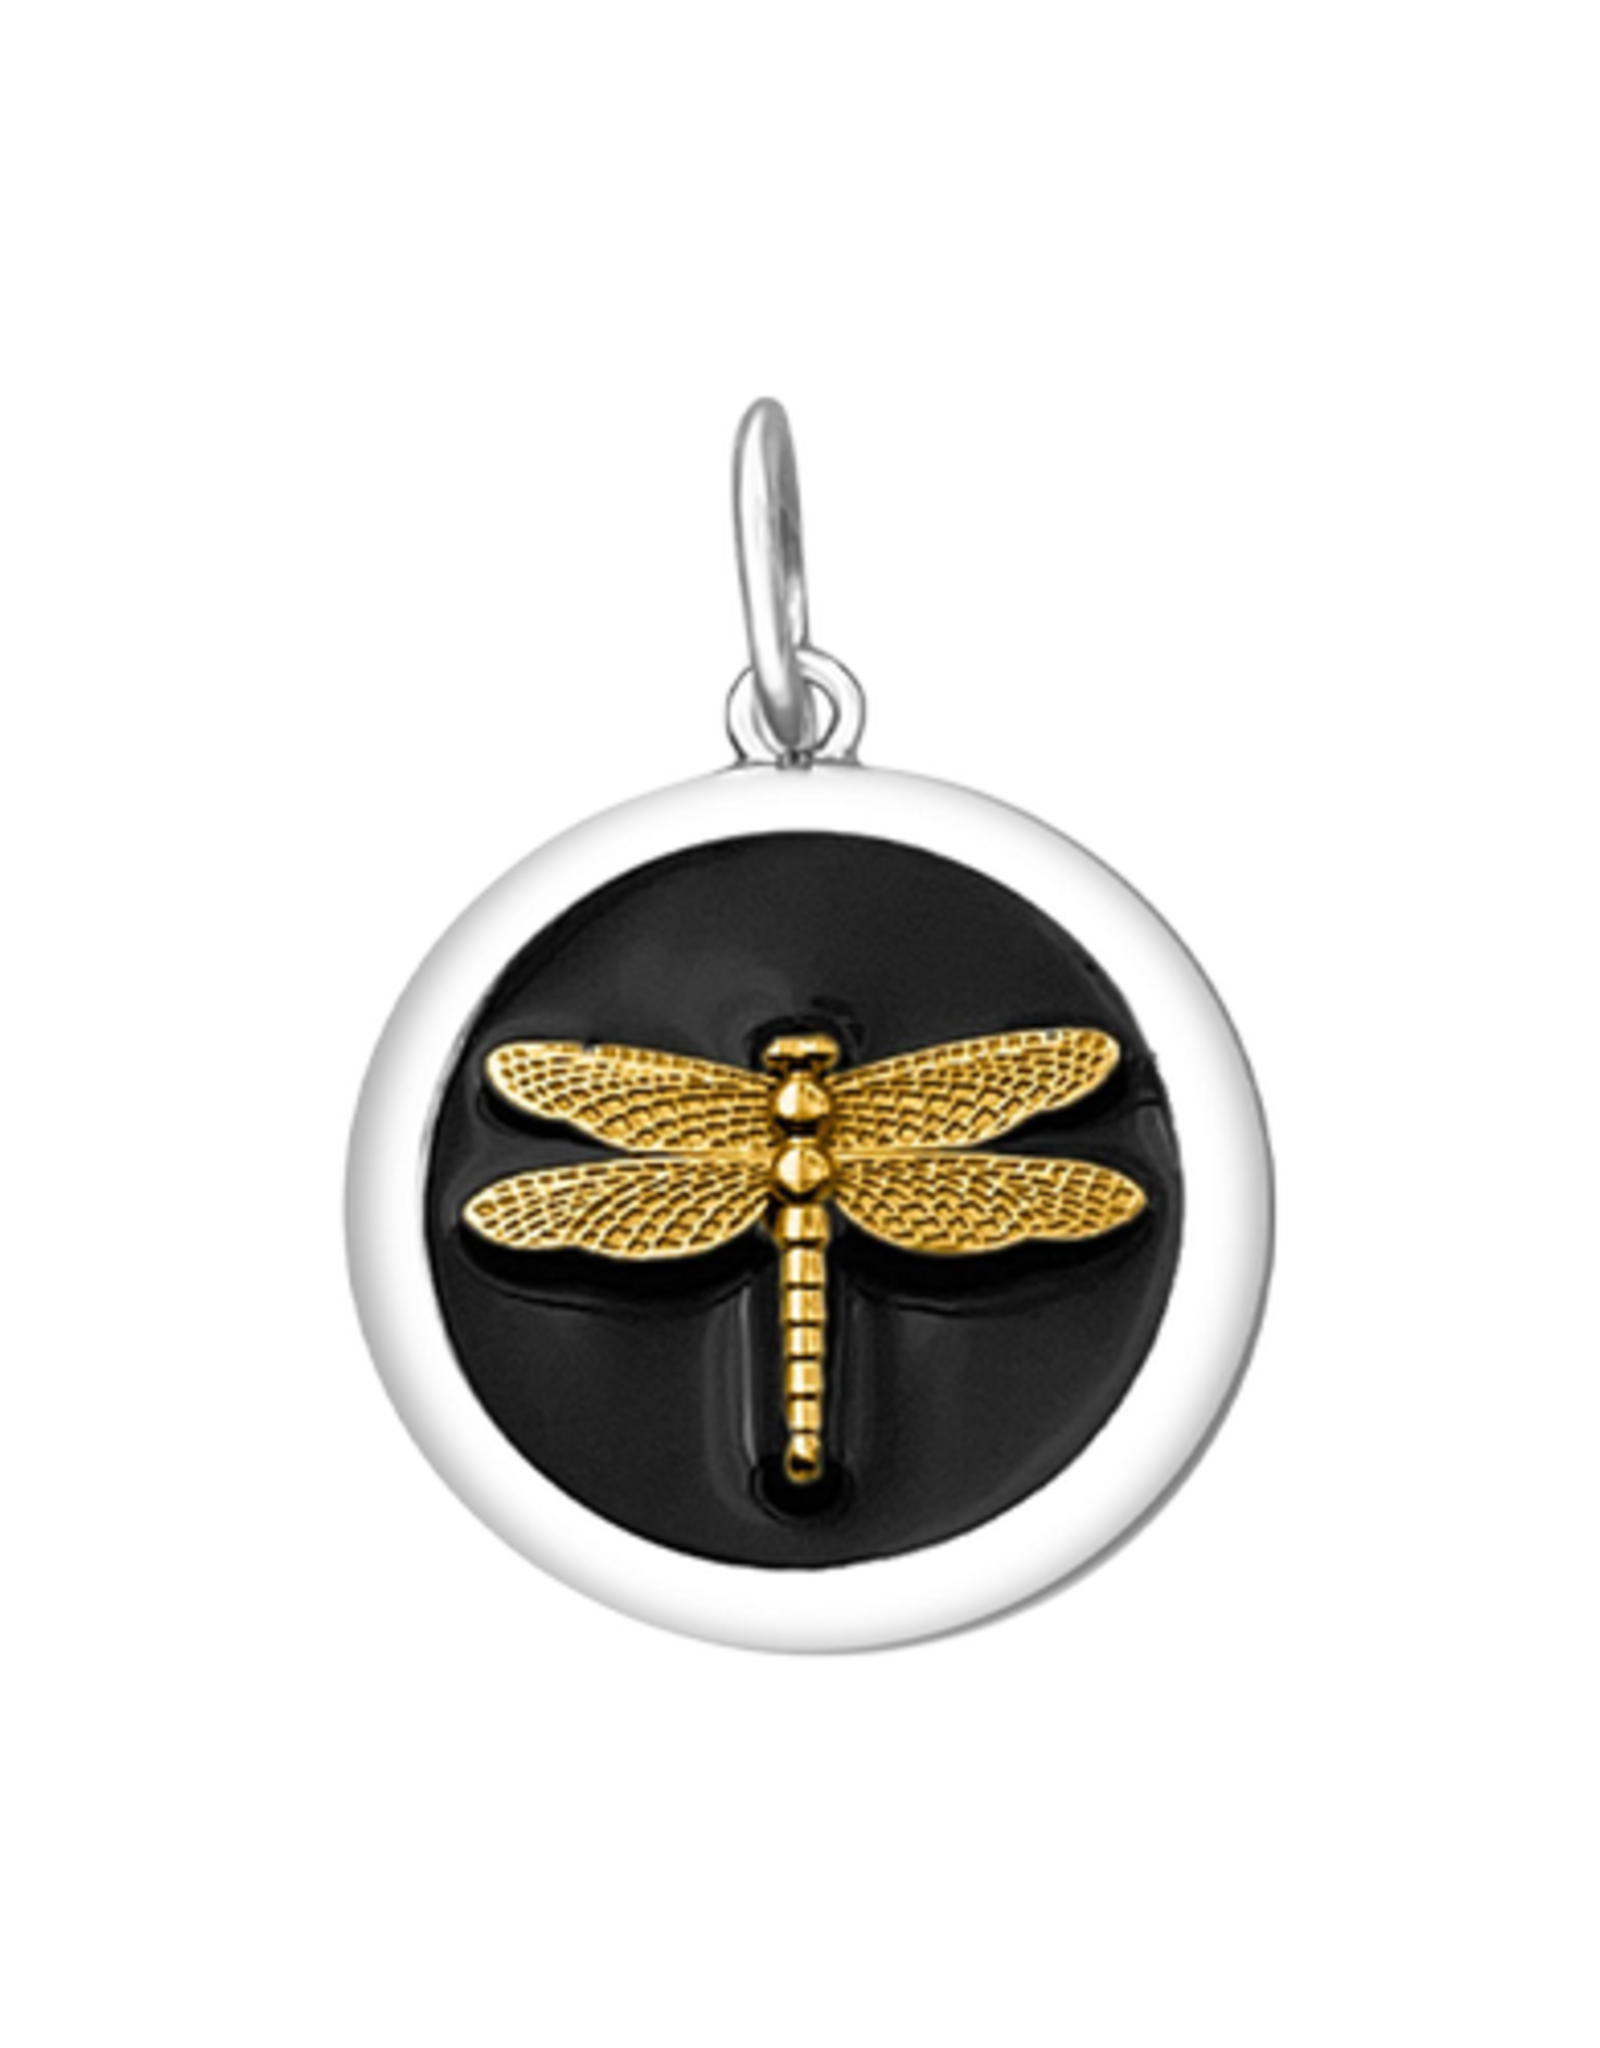 Gold Dragonfly